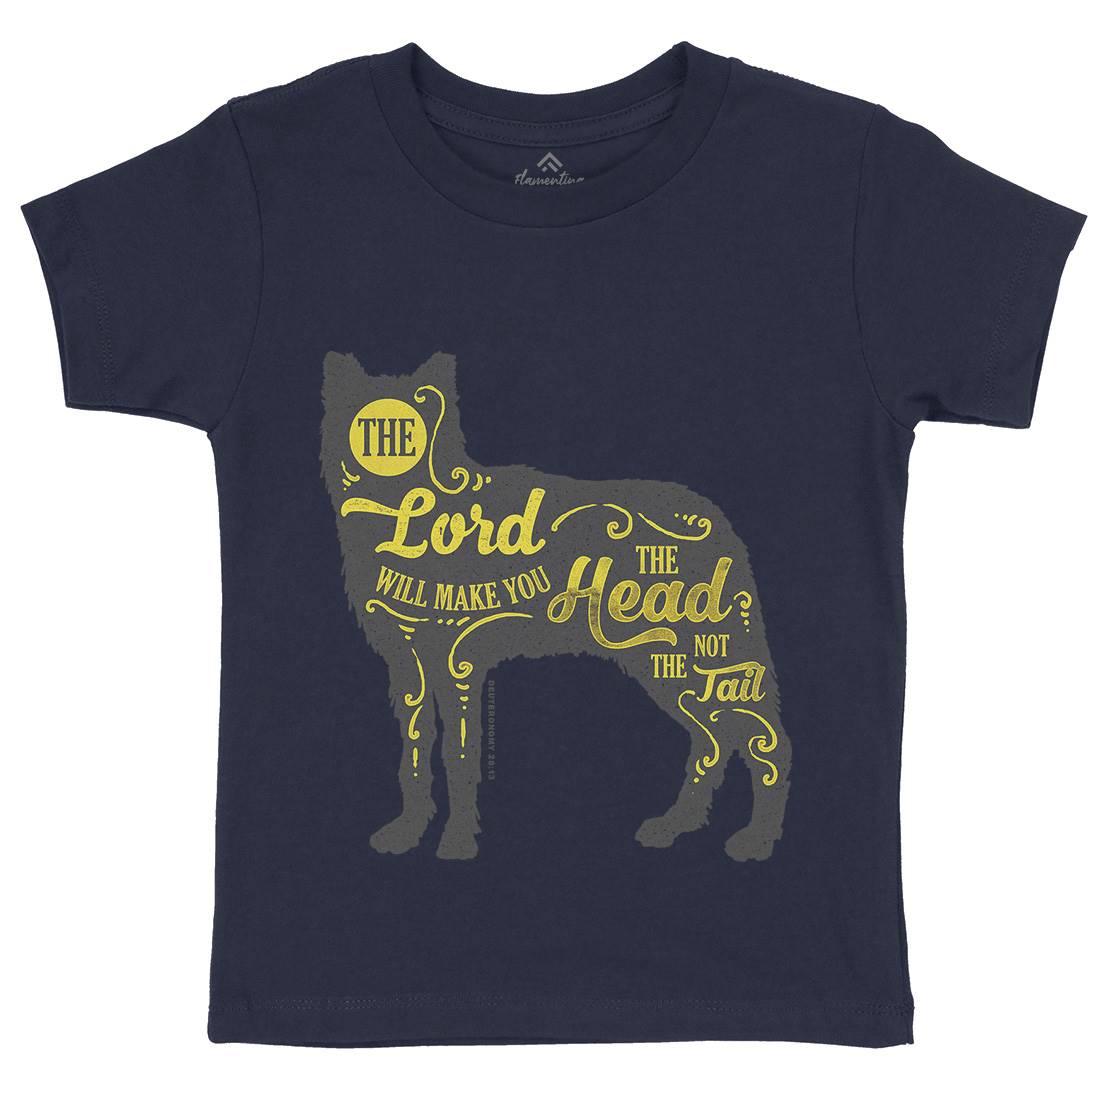 Head Not The Tail Kids Crew Neck T-Shirt Religion A326